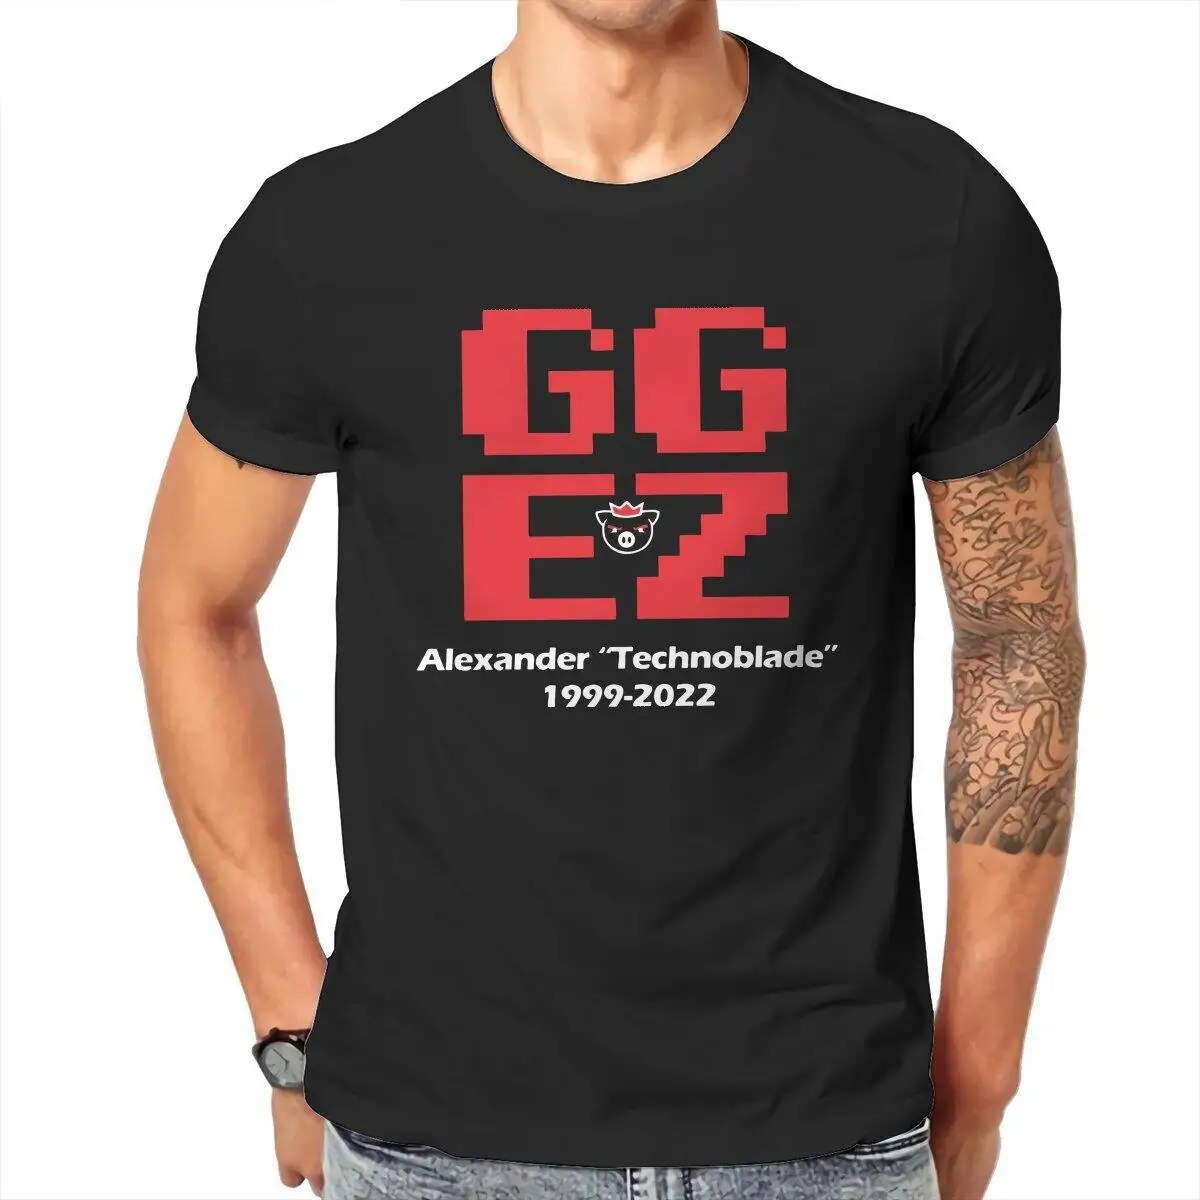 GG EZ T Shirts for Men Pure Cotton Funny T-Shirts Round Neck Technoblade Never Dies Tees Short Sleeve Tops Party